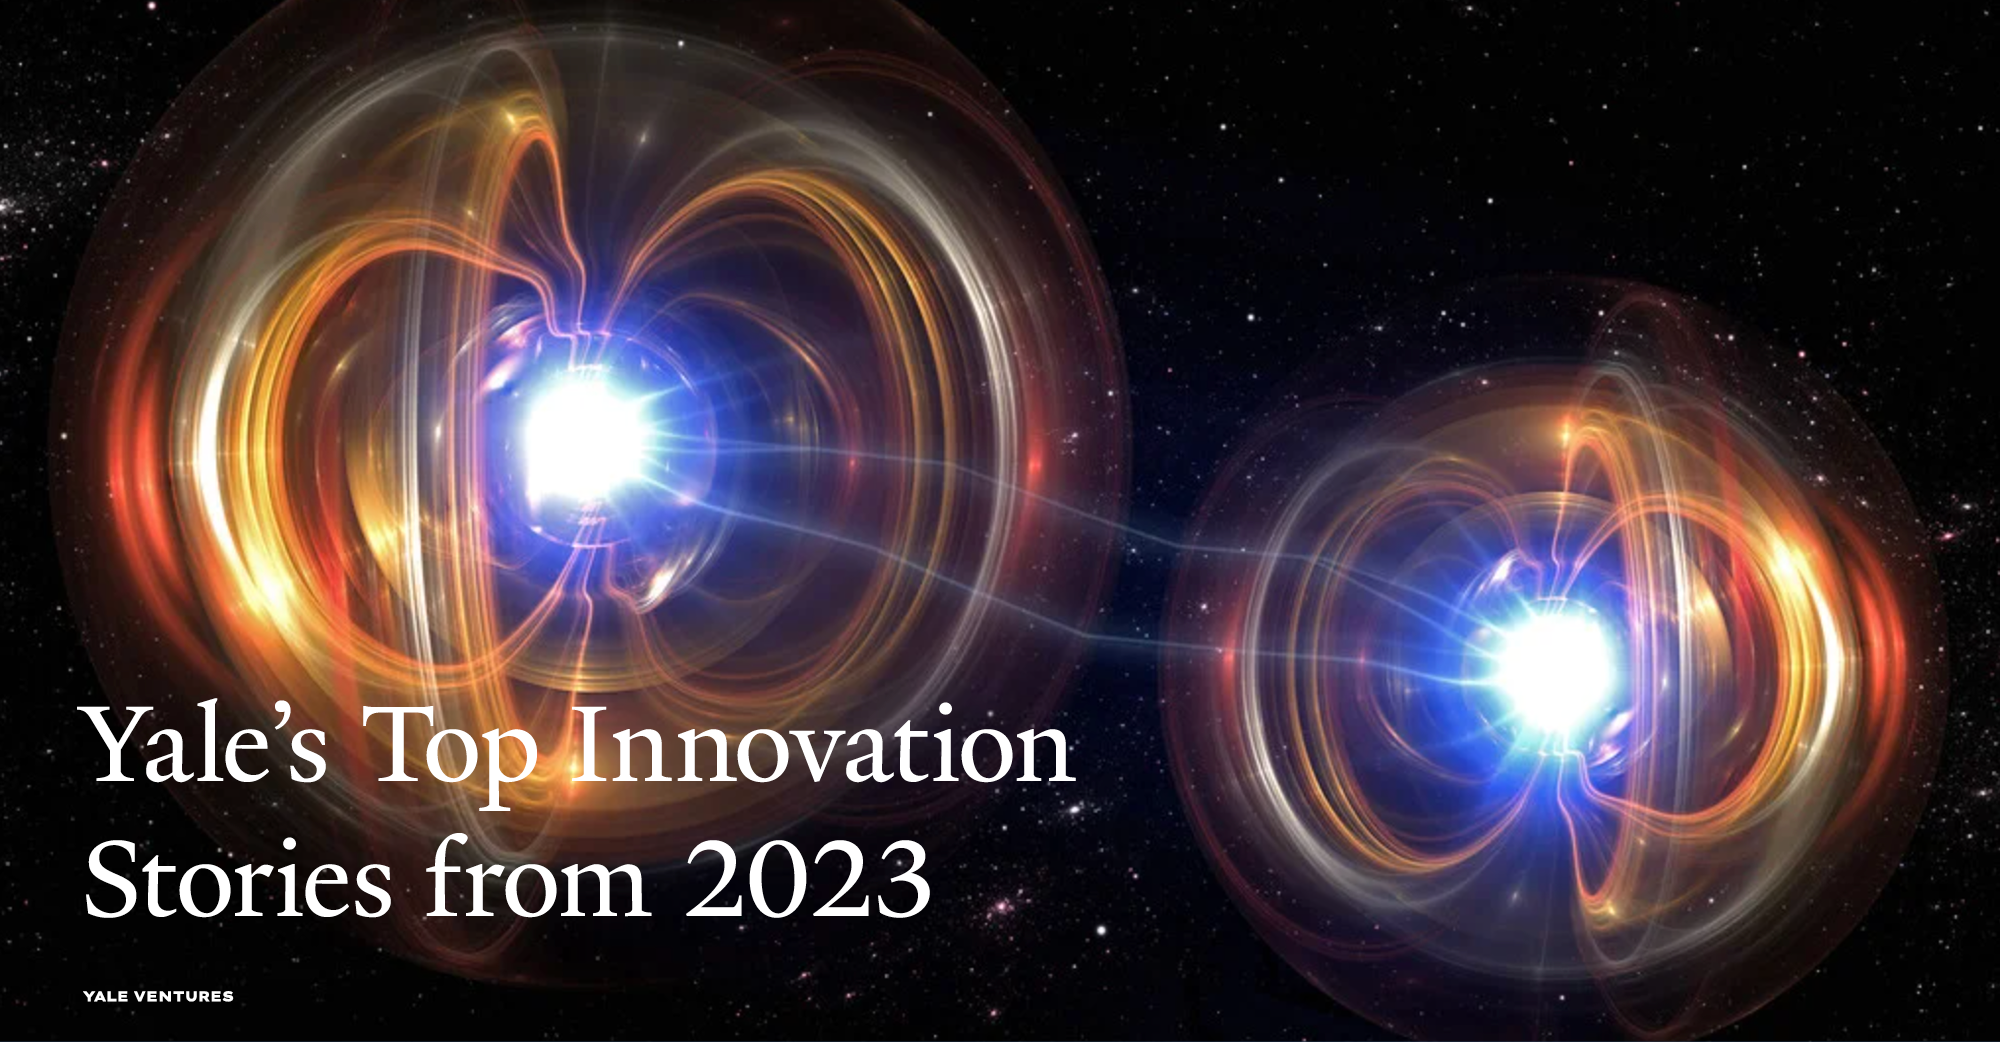 Yales top innovation stories 2023